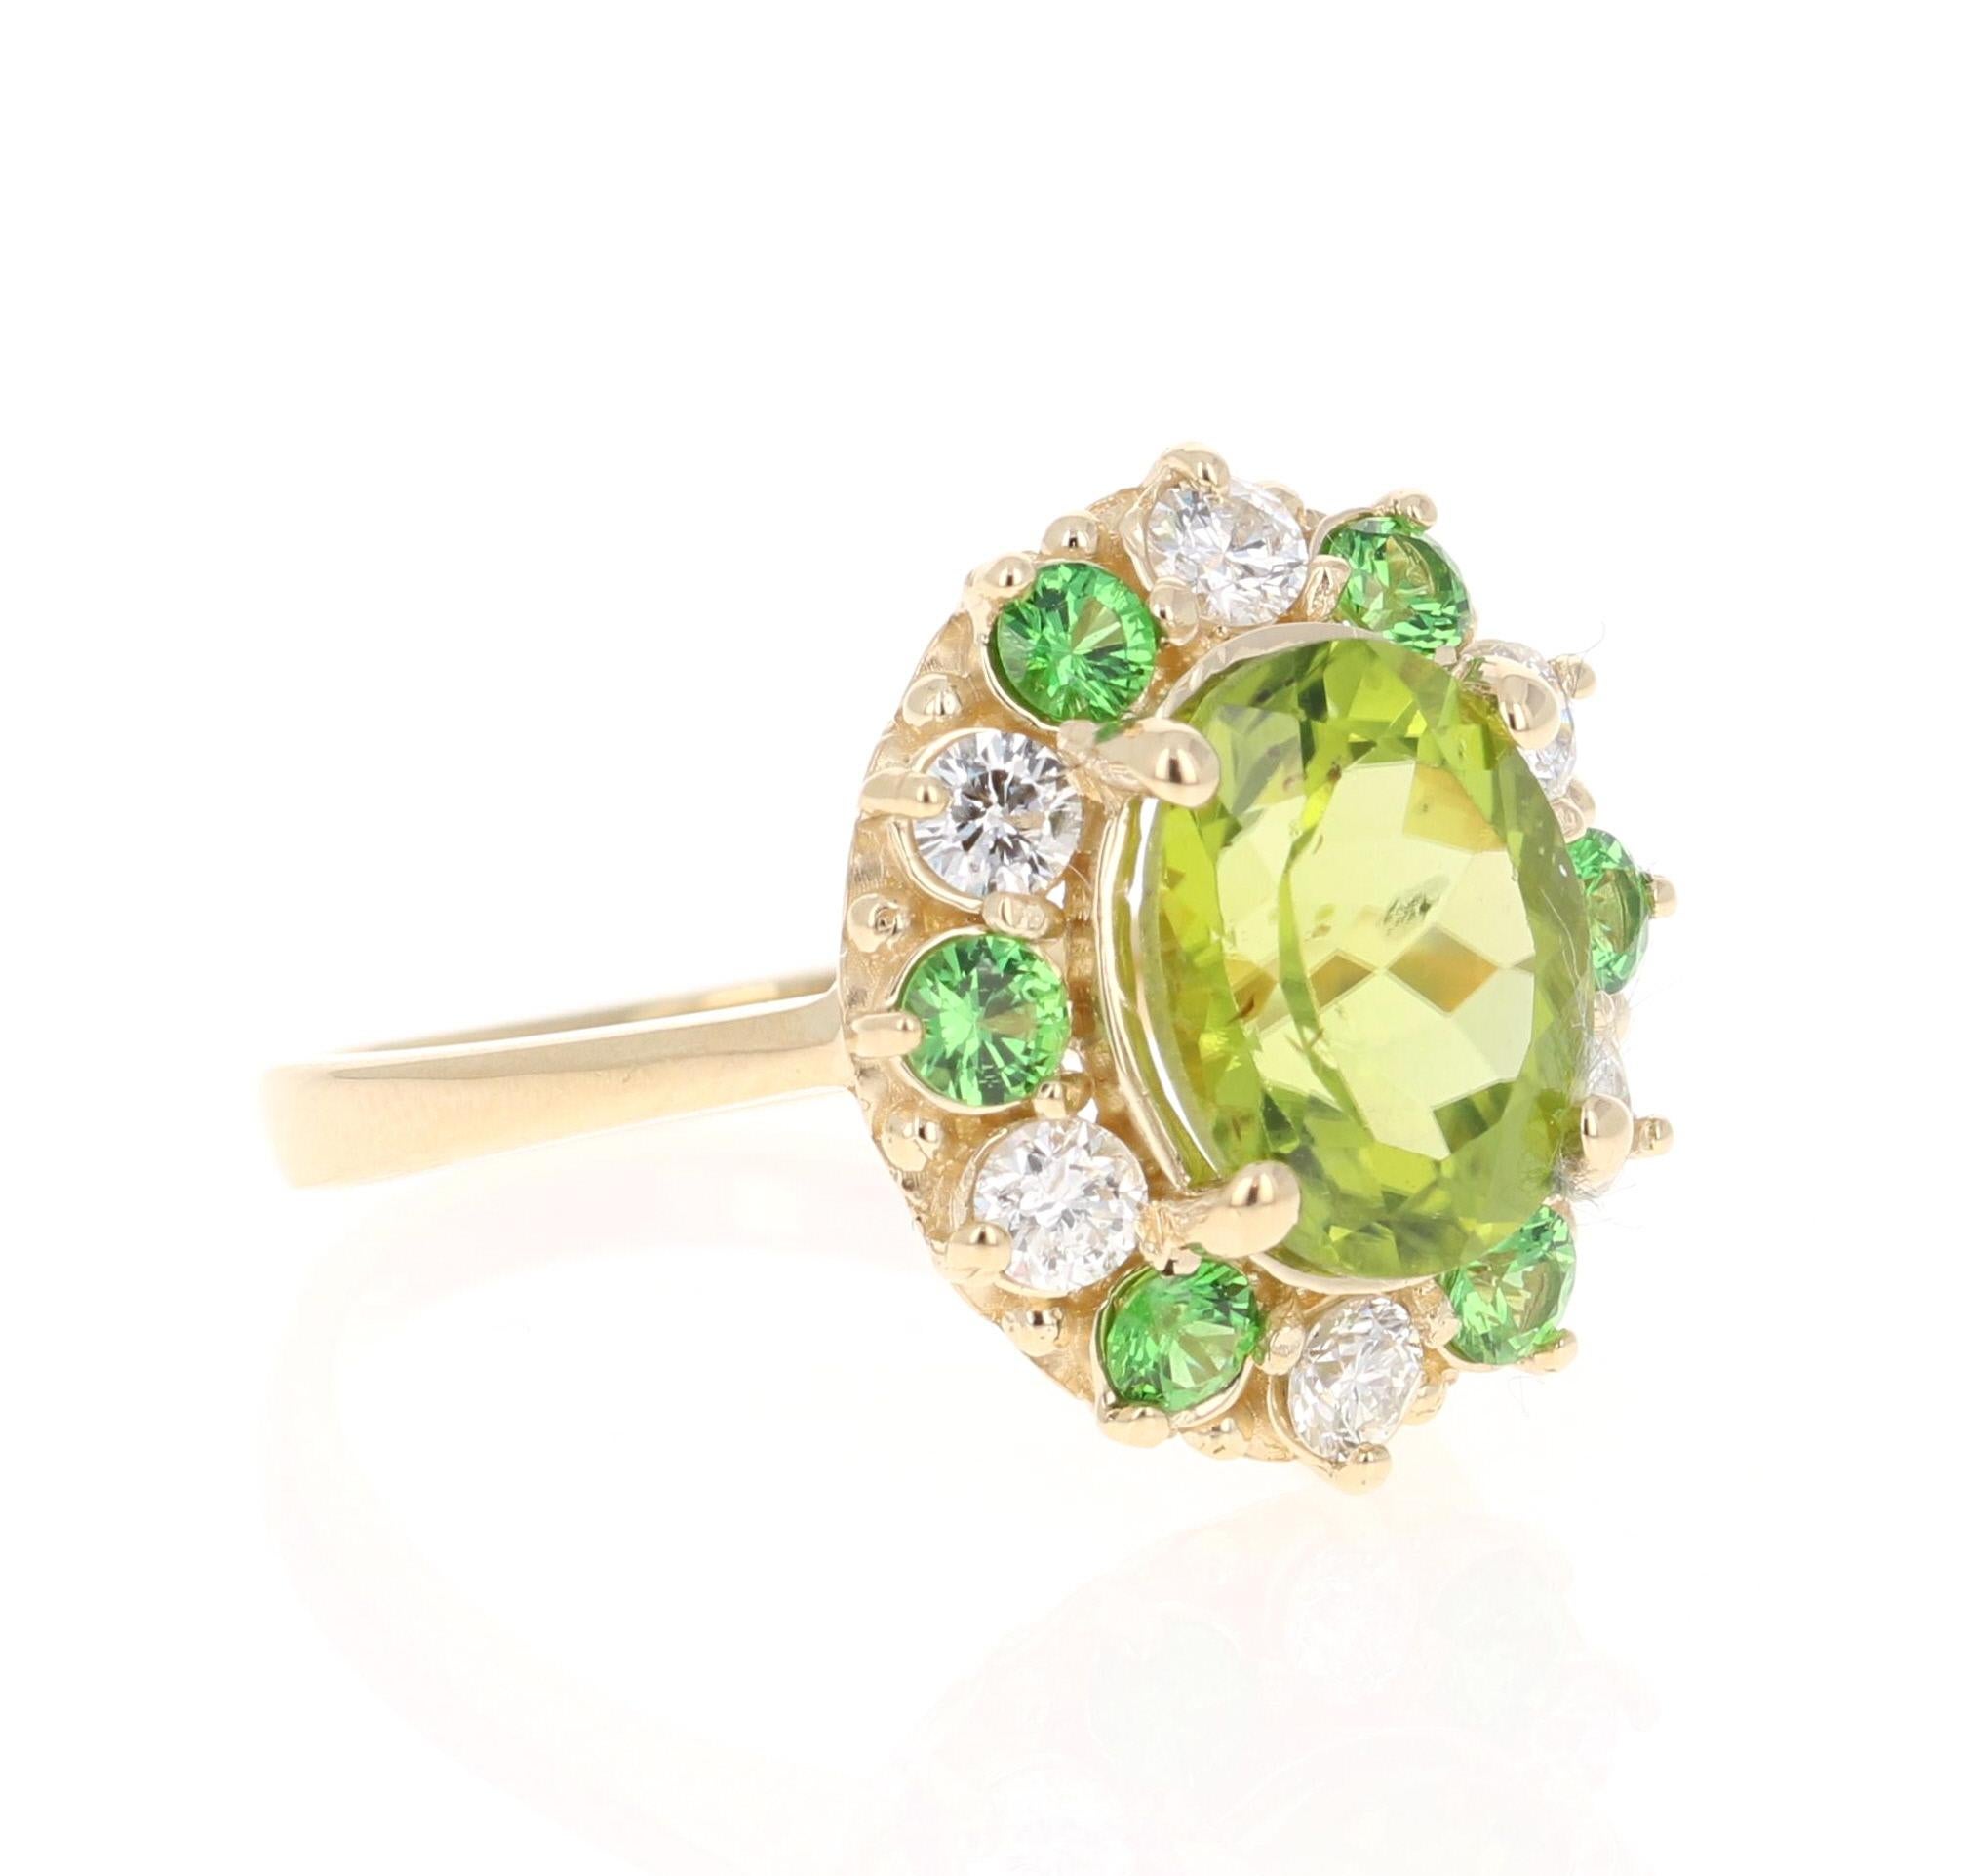 4.13 Carat Peridot Diamond Tsavorite Yellow Gold Ring - this can be a stunning and unique alternative to a unique engagement ring!

This beautiful ring has a Oval Cut Peridot in the center that weighs 3.14 carats. The Peridot measures at 8 mm x 10